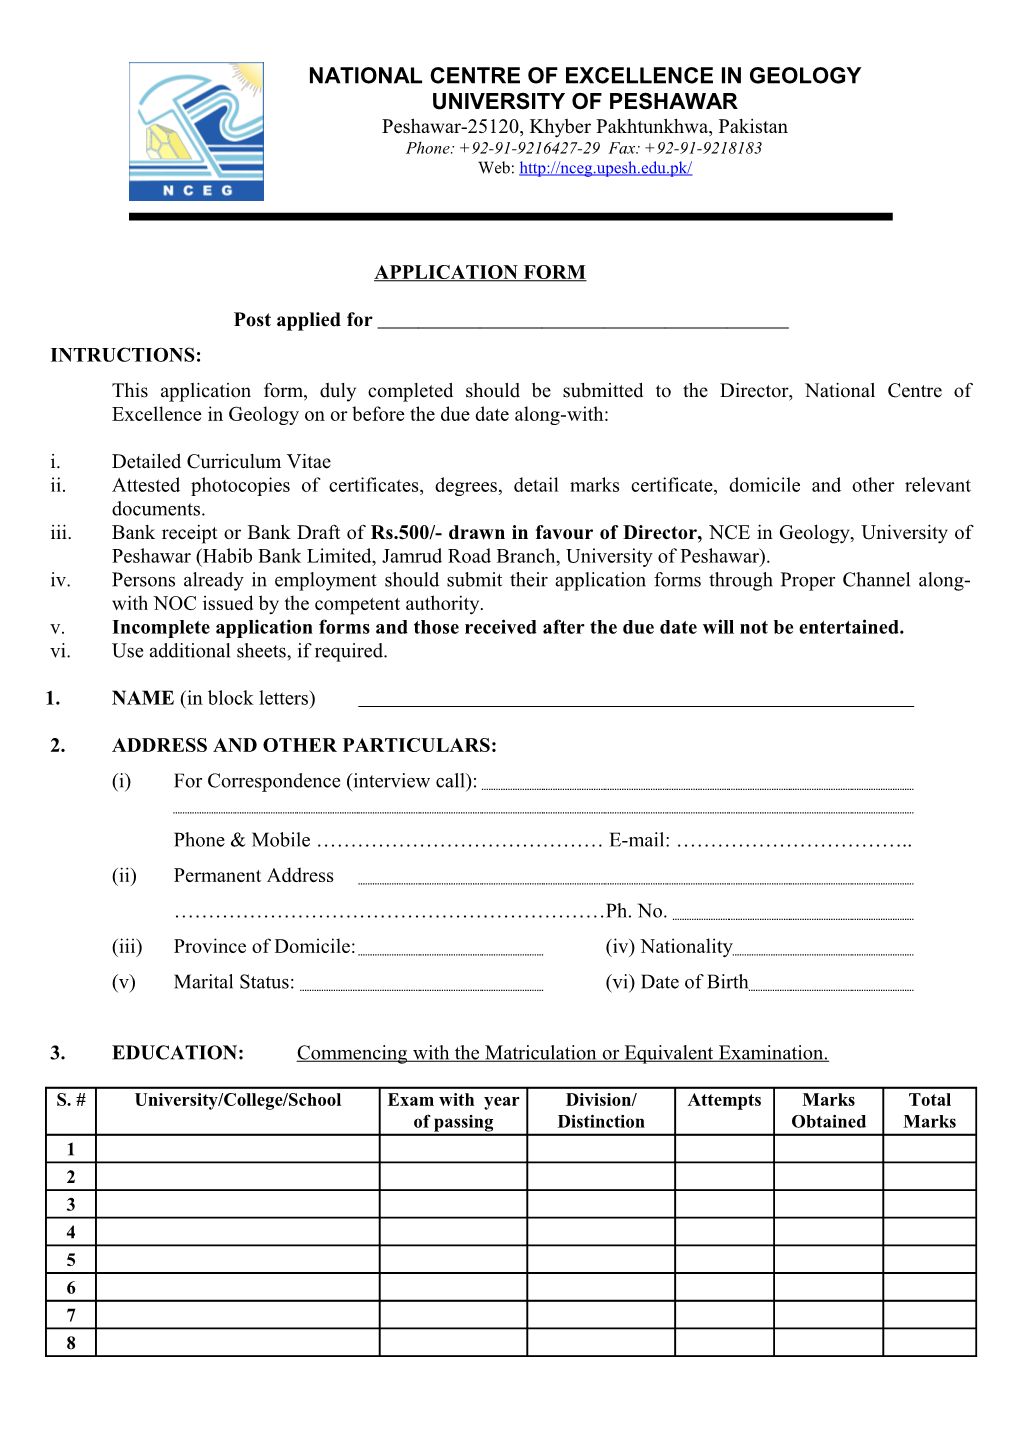 Application Form s66